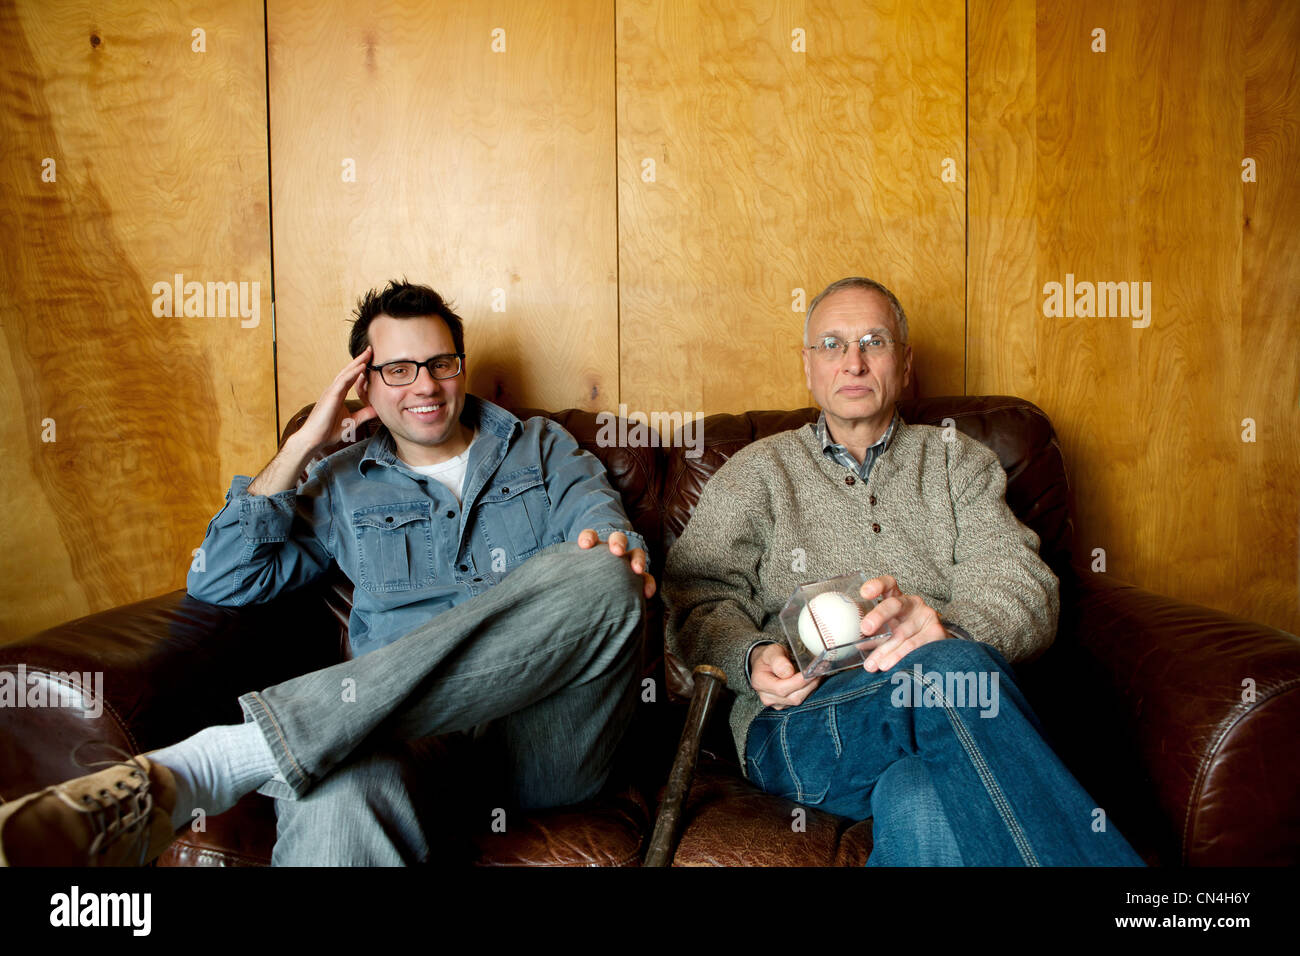 Father and adult son sitting on couch, smiling Stock Photo